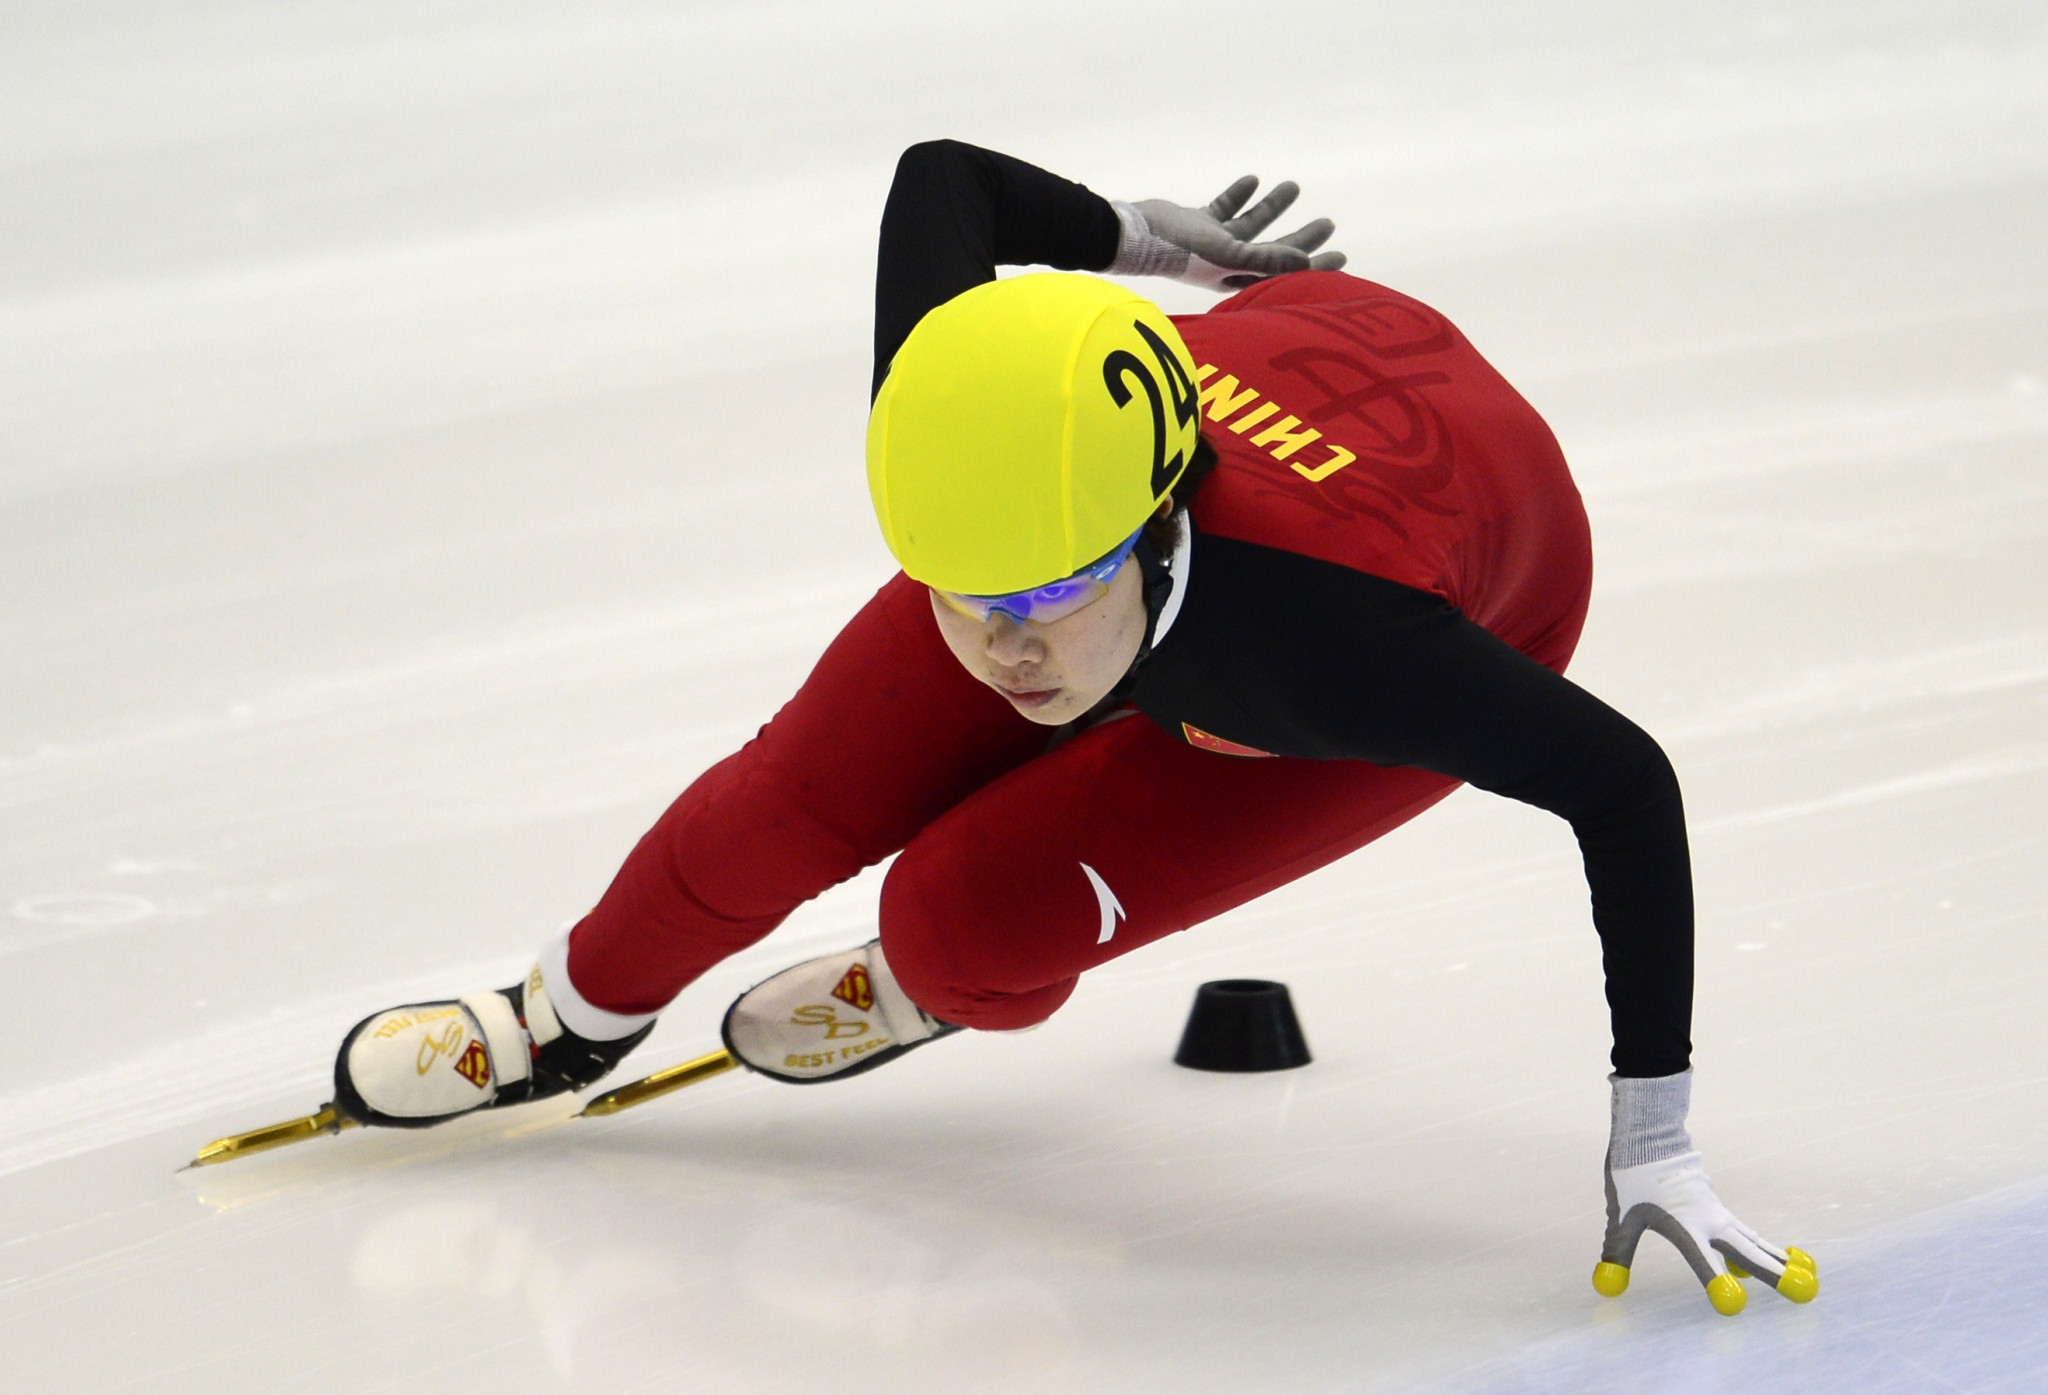 China's three-time Olympic champion Zhou Yang was among the skaters to progress through to the next round of the women's 1,500m event at the ISU Short Track World Cup in Shanghai. ©Getty Images